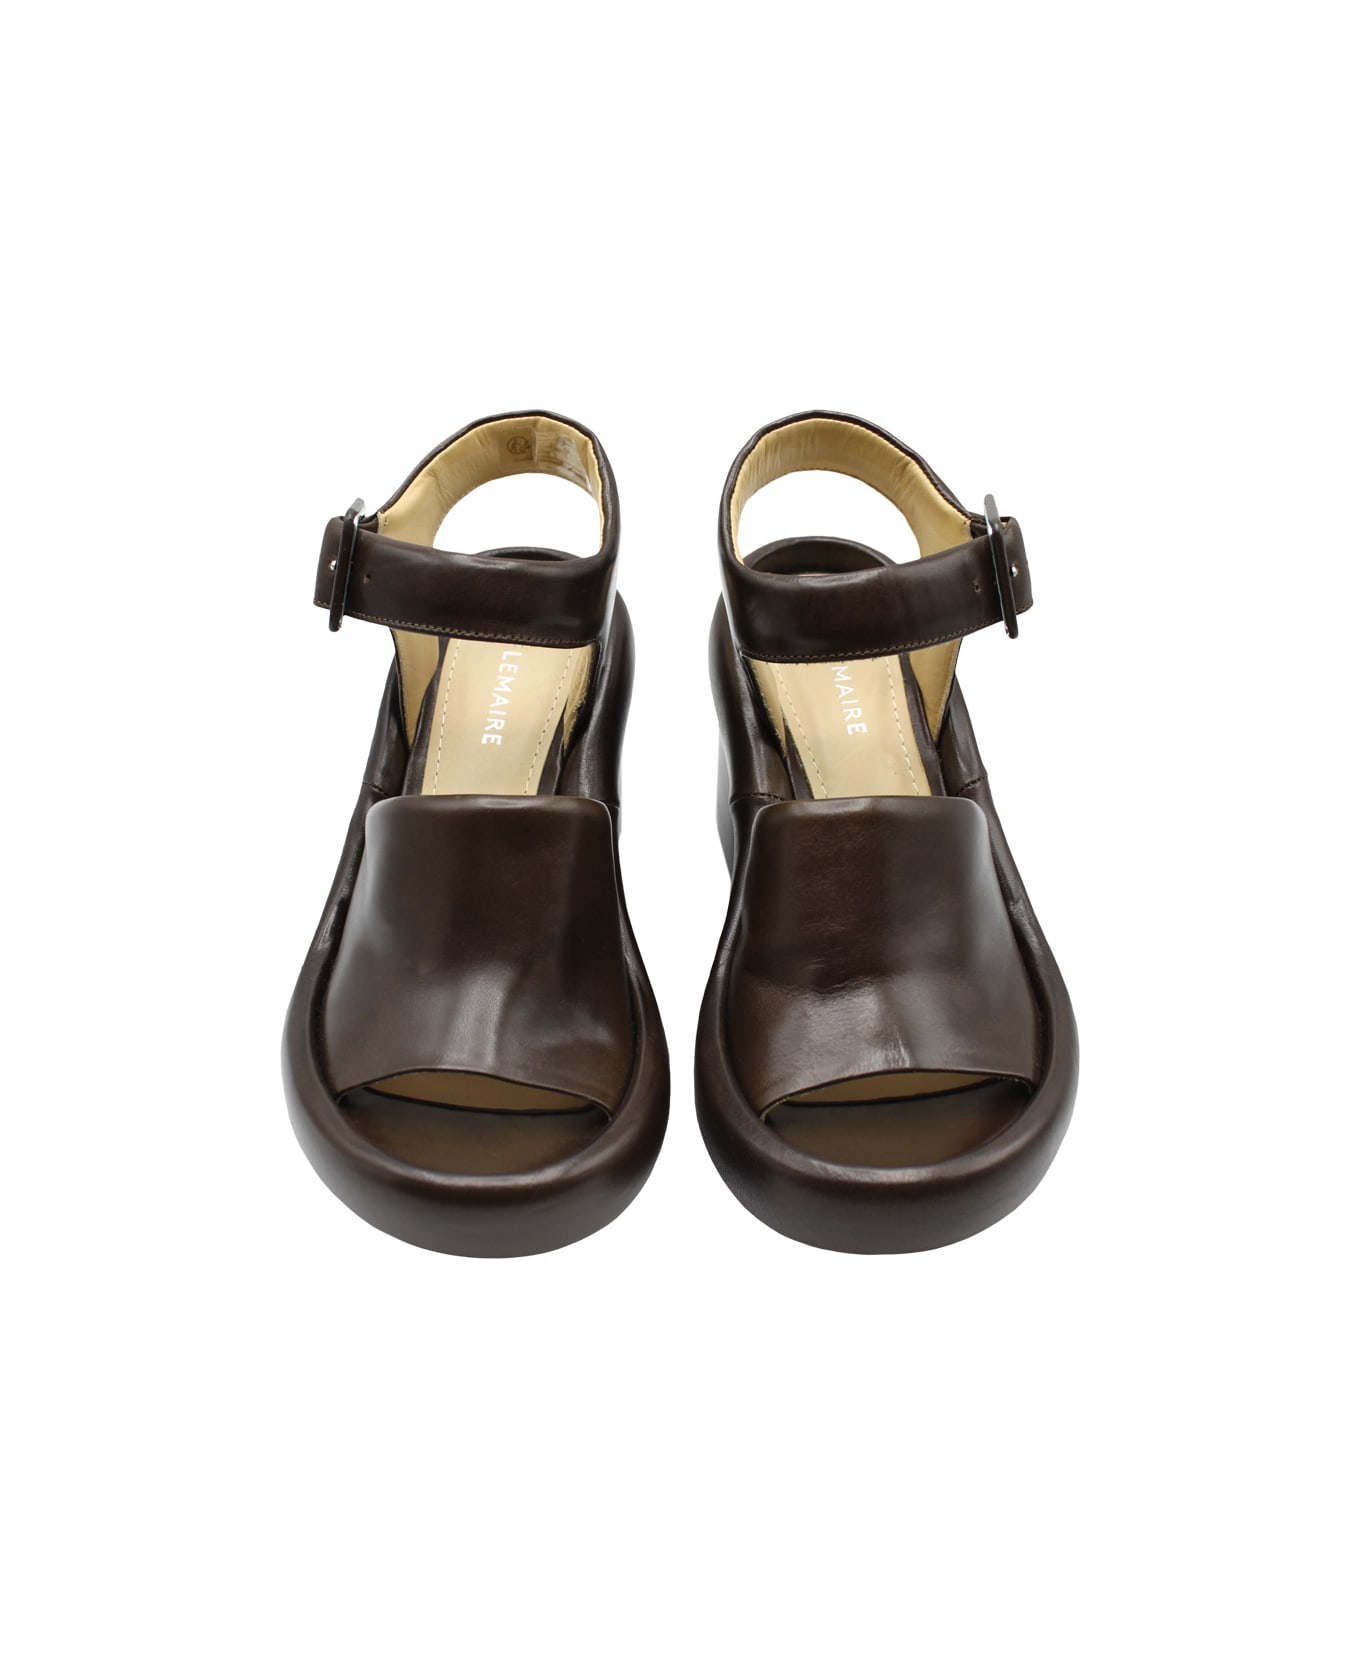 Lemaire Padded Wedge Sandal